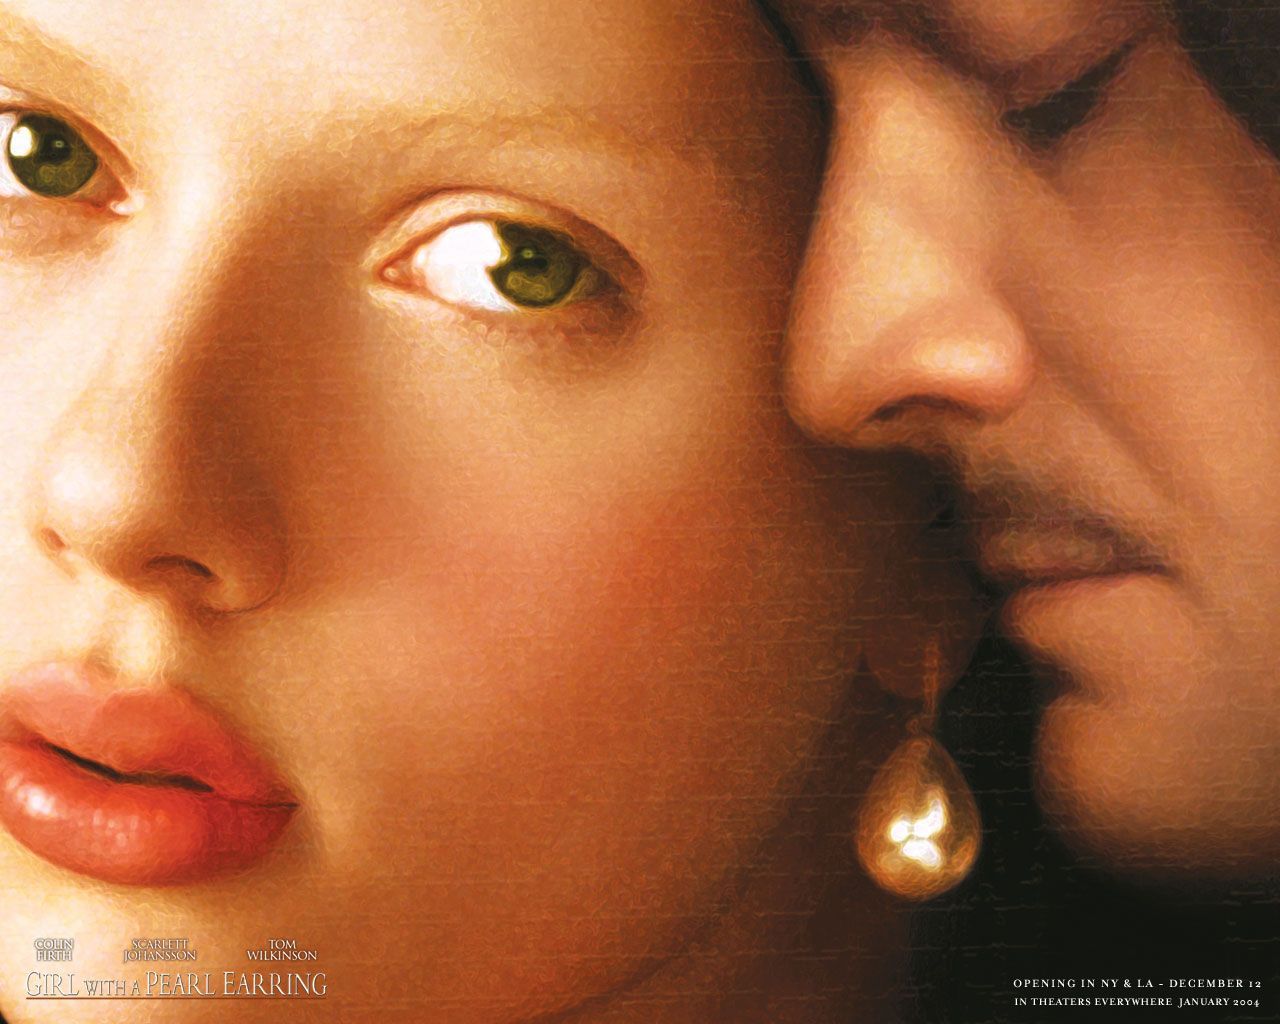 Girl with Pearl Earring Film. Girl with Pearl Earring. Girl with pearl earring, Pearl earrings, Pearls